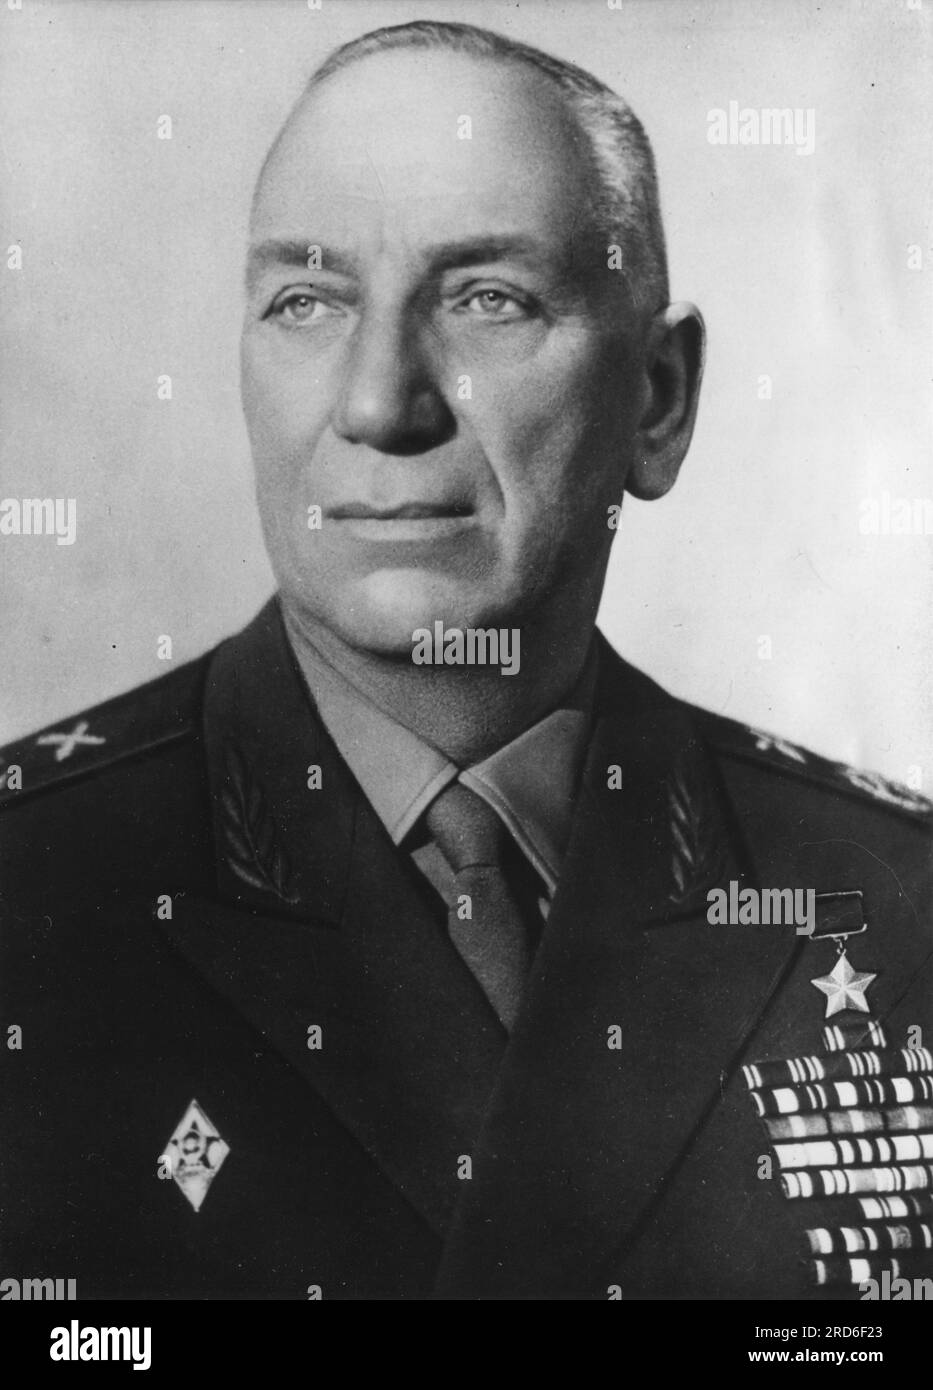 Voronow, Nikolay Nikolajewitsch, 5.5.1899 - 28,2.1968, sowjetischer General, ADDITIONAL-RIGHTS-CLEARANCE-INFO-NOT-AVAILABLE Stockfoto